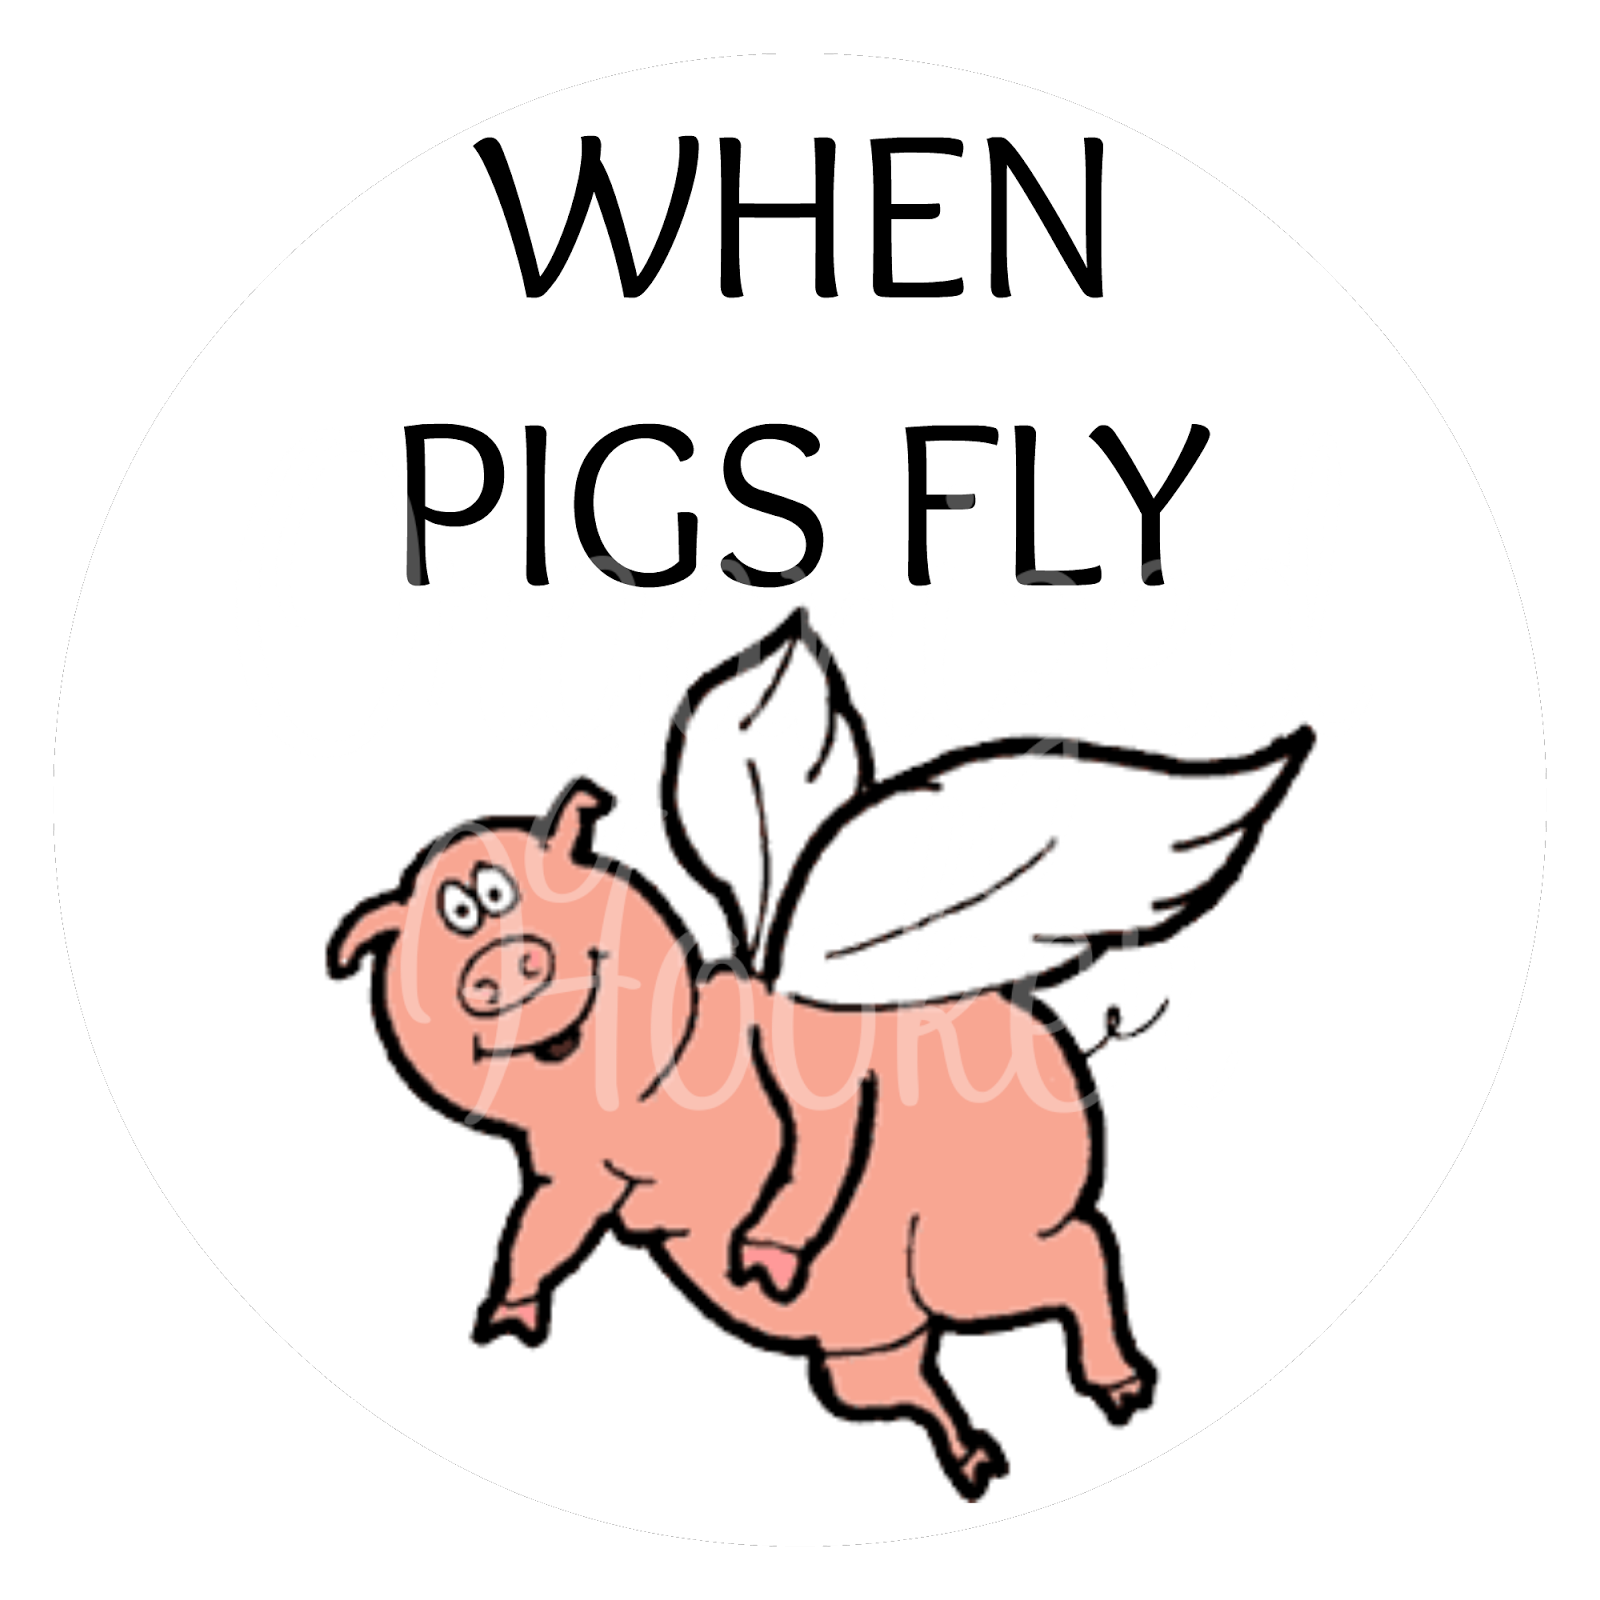 Fly как переводится на русский. When Pigs Fly. When Pigs Fly idiom. When Pigs can Fly. When Pigs Fly рисунок.